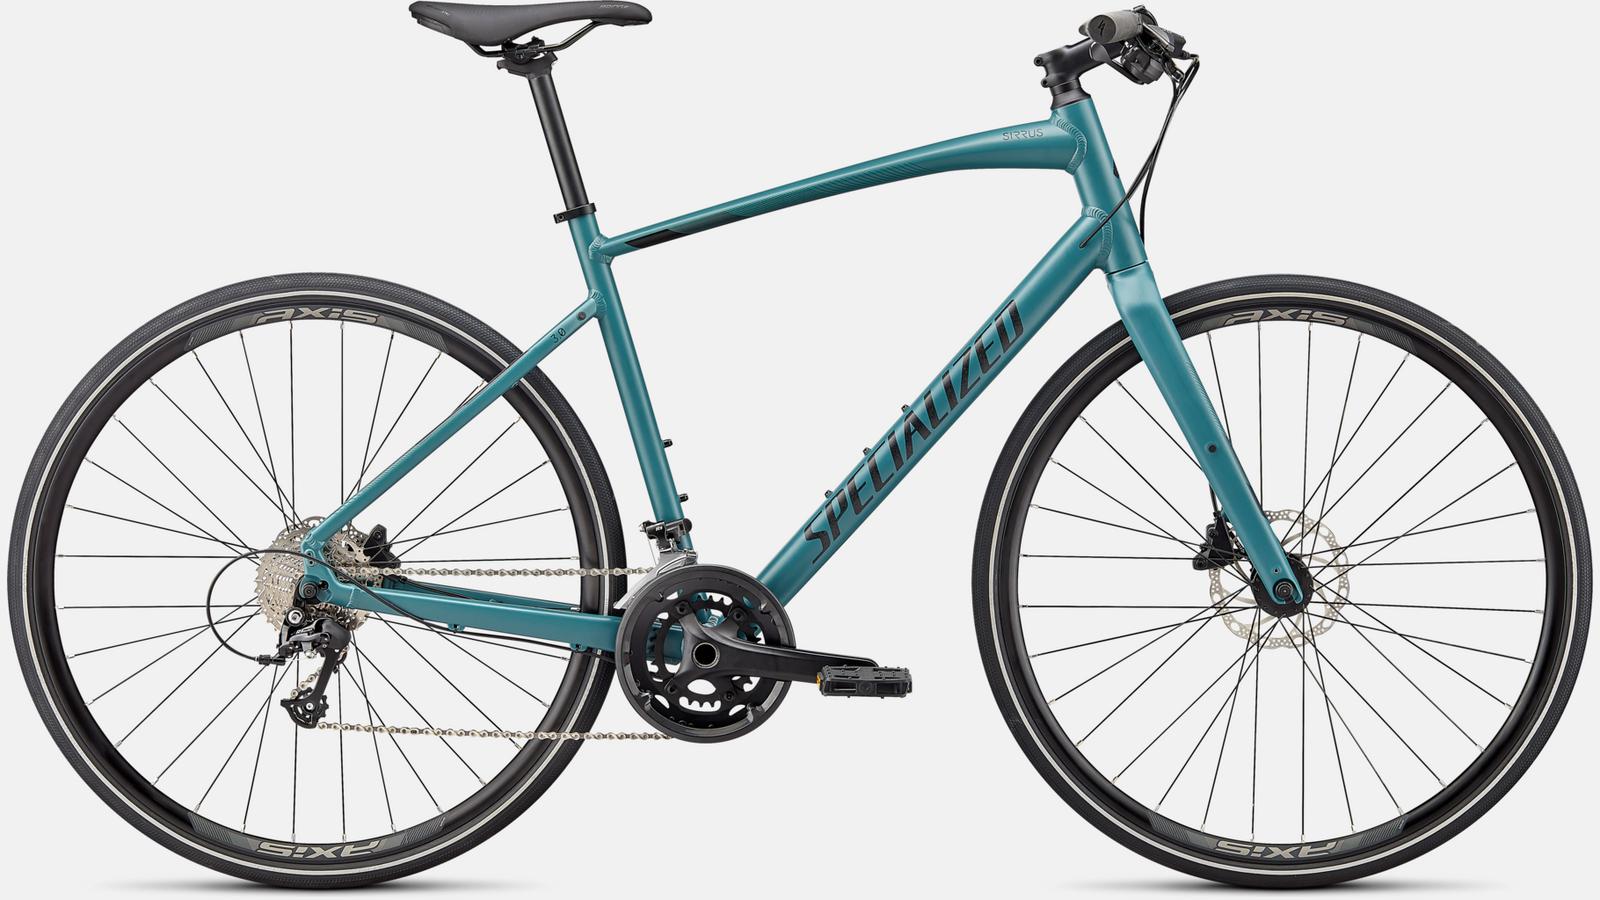 Paint for 2022 Specialized Sirrus 3.0 - Satin Dusty Turquoise